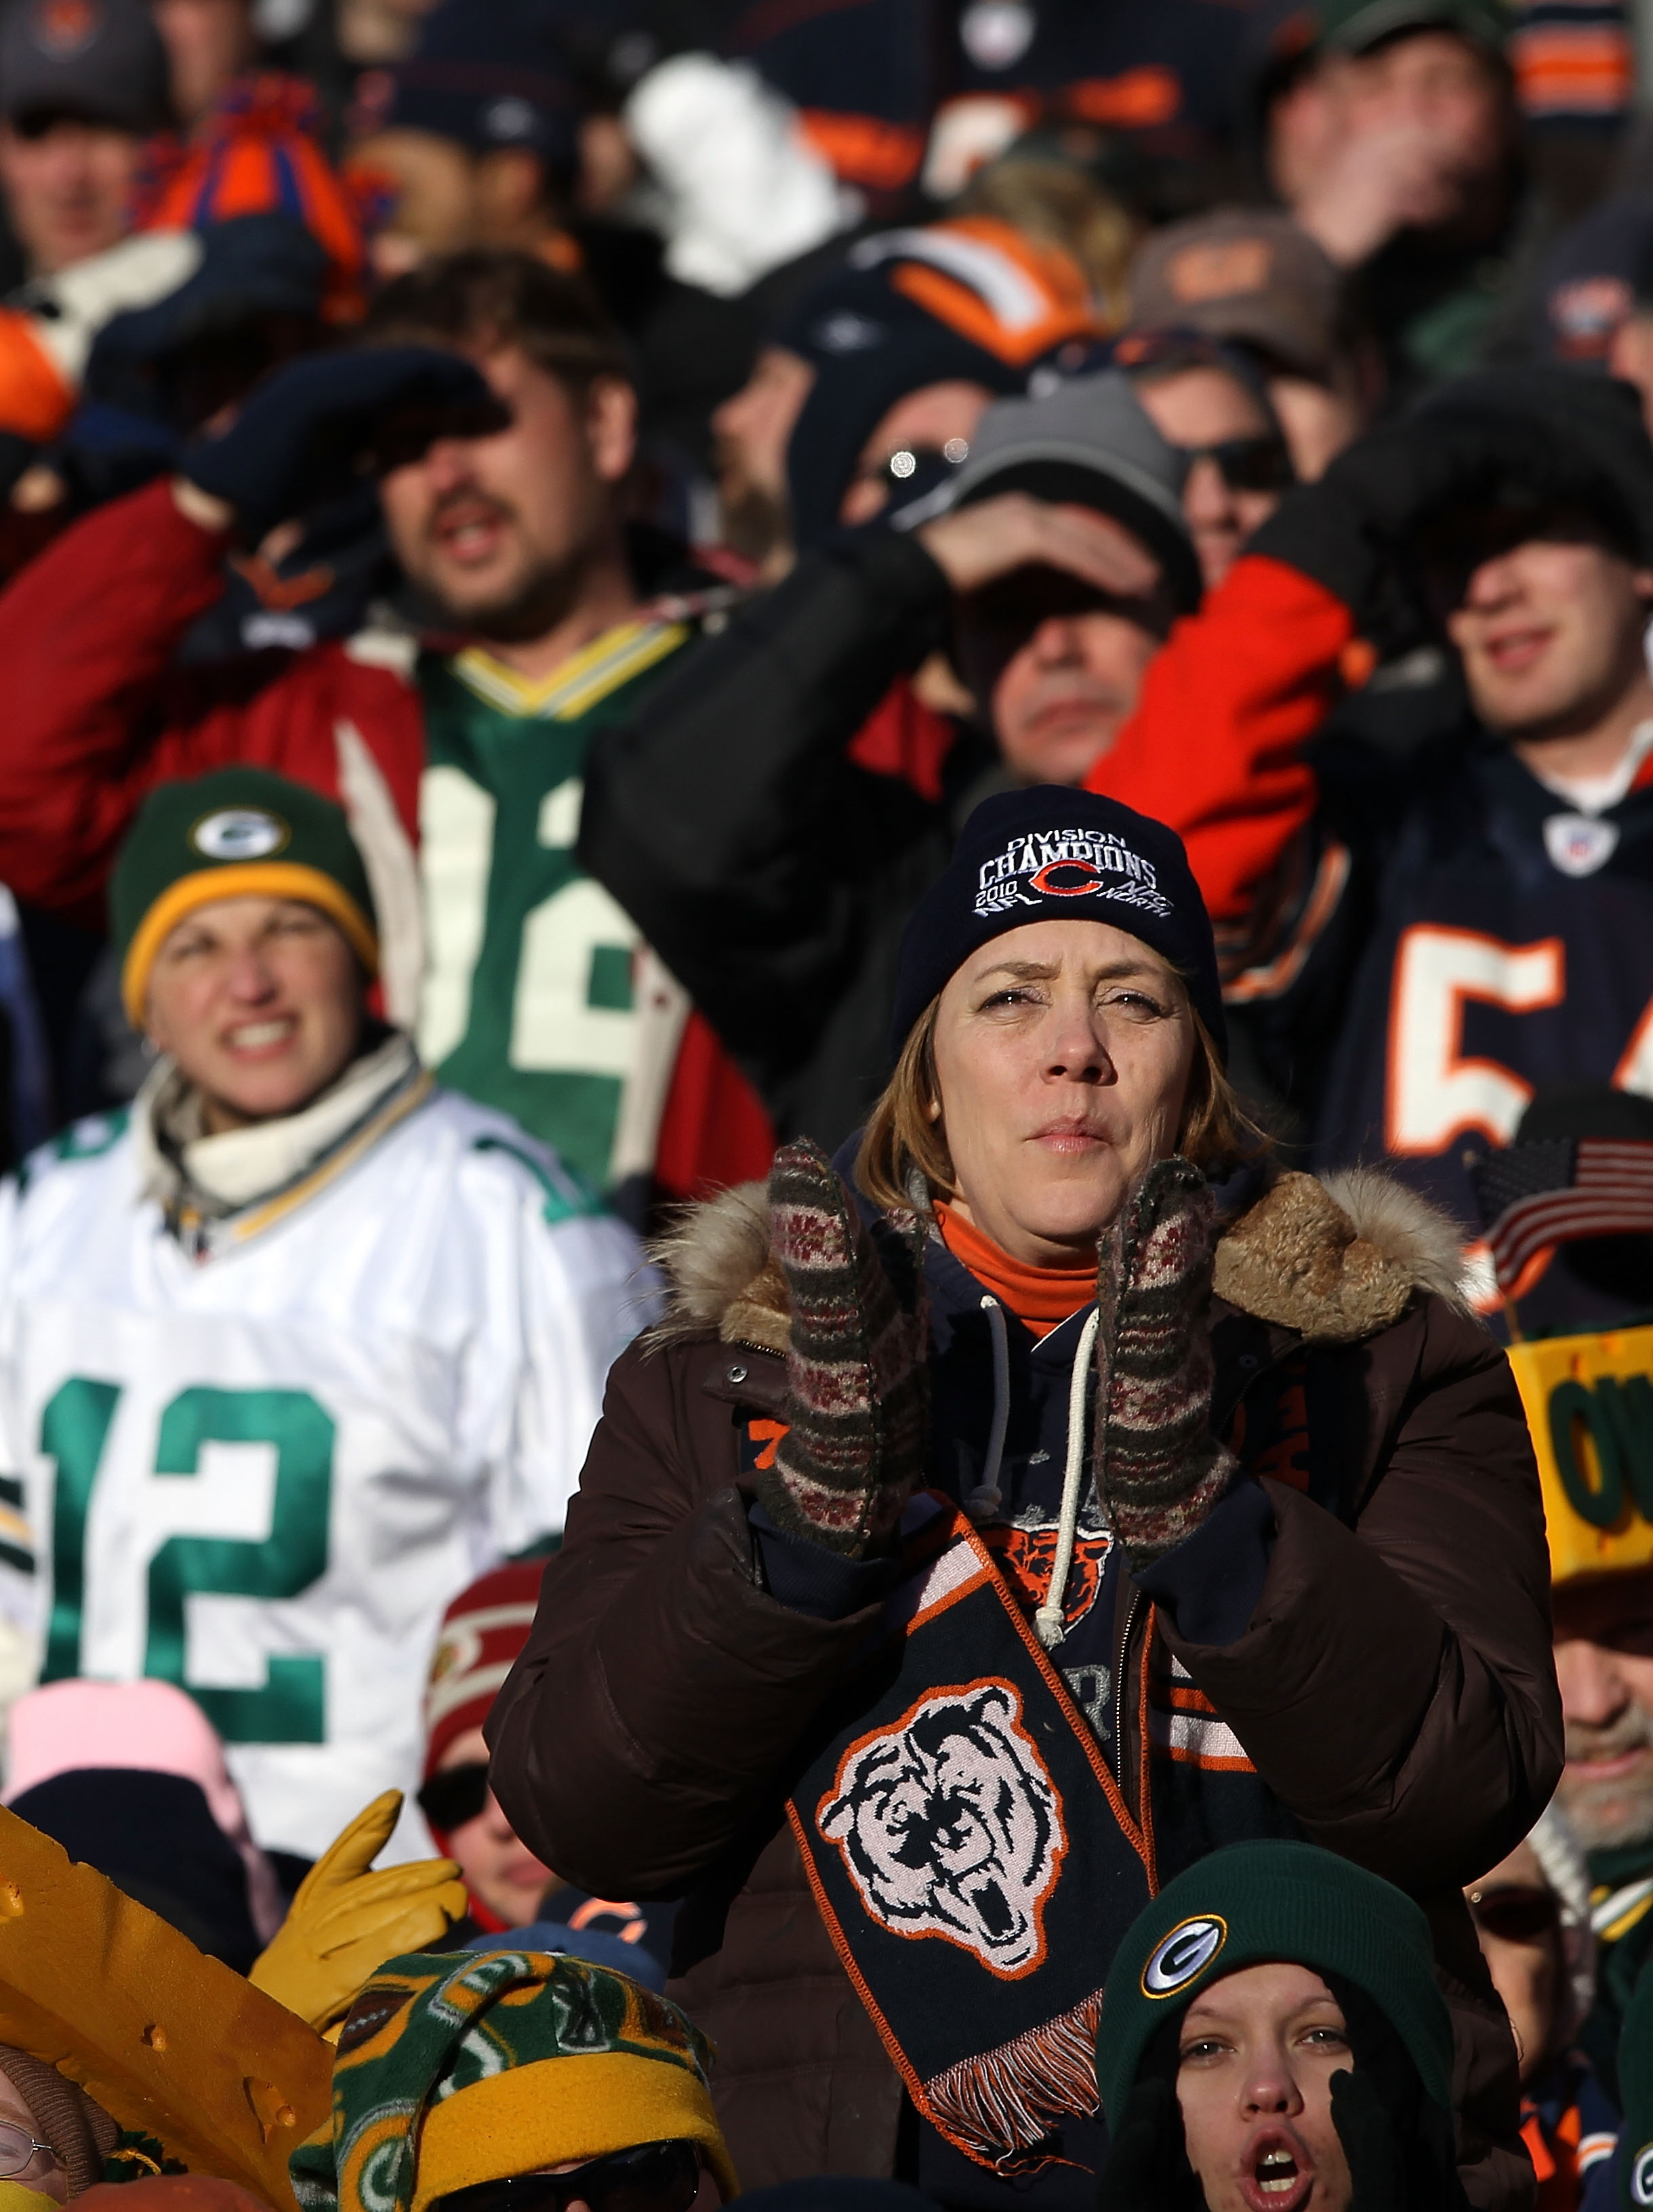 CHICAGO, IL - JANUARY 23:  A general view of the fans in the NFC Championship Game between the Green Bay Packers and the Chicago Bears at Soldier Field on January 23, 2011 in Chicago, Illinois.  (Photo by Doug Pensinger/Getty Images)